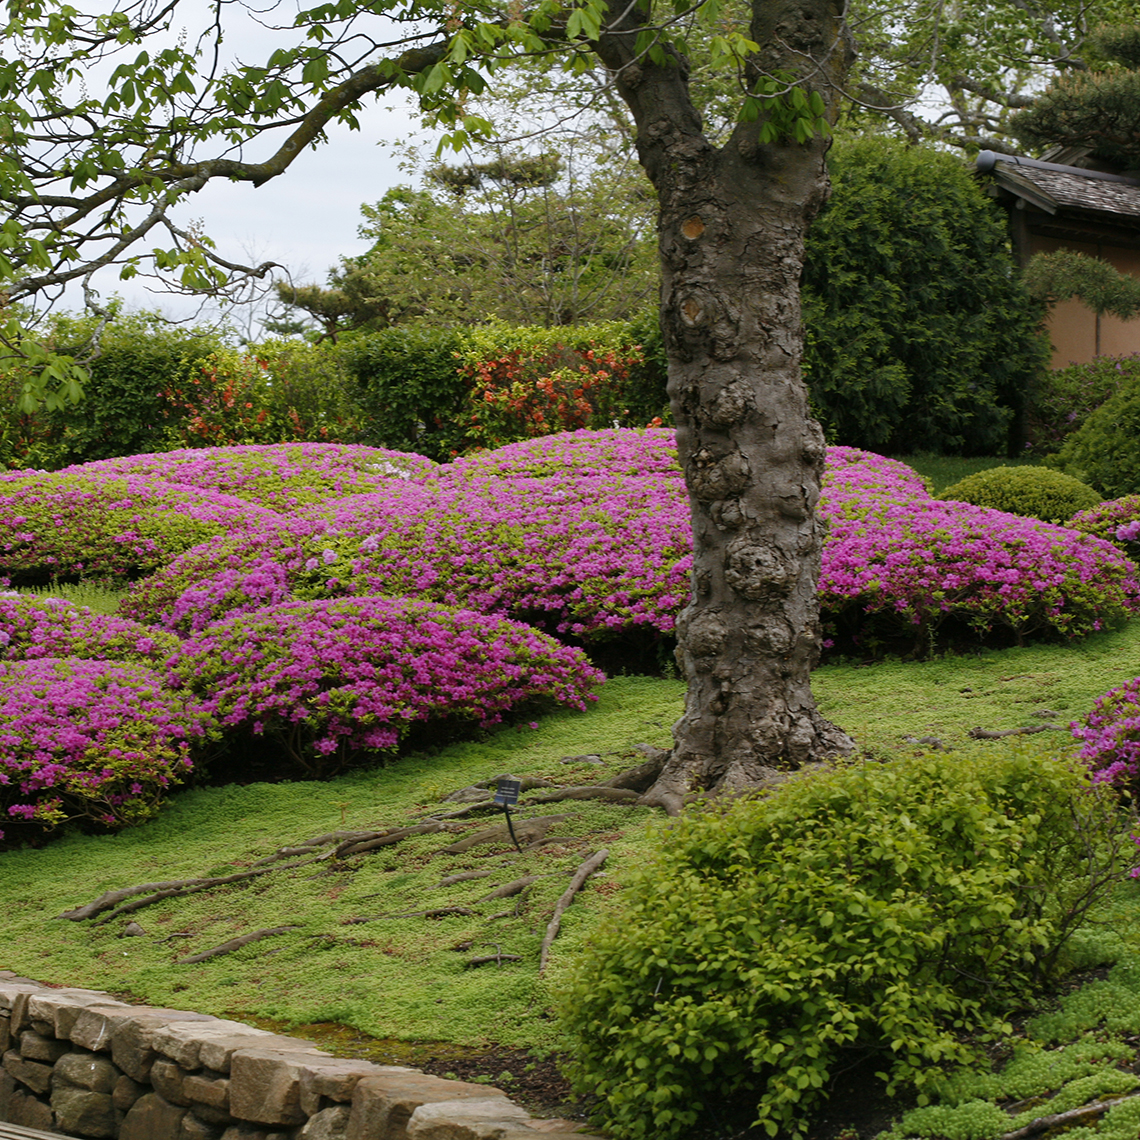 Mounded drifts of Rhododendron Compacta's lavender blooms filling landscape behind tree